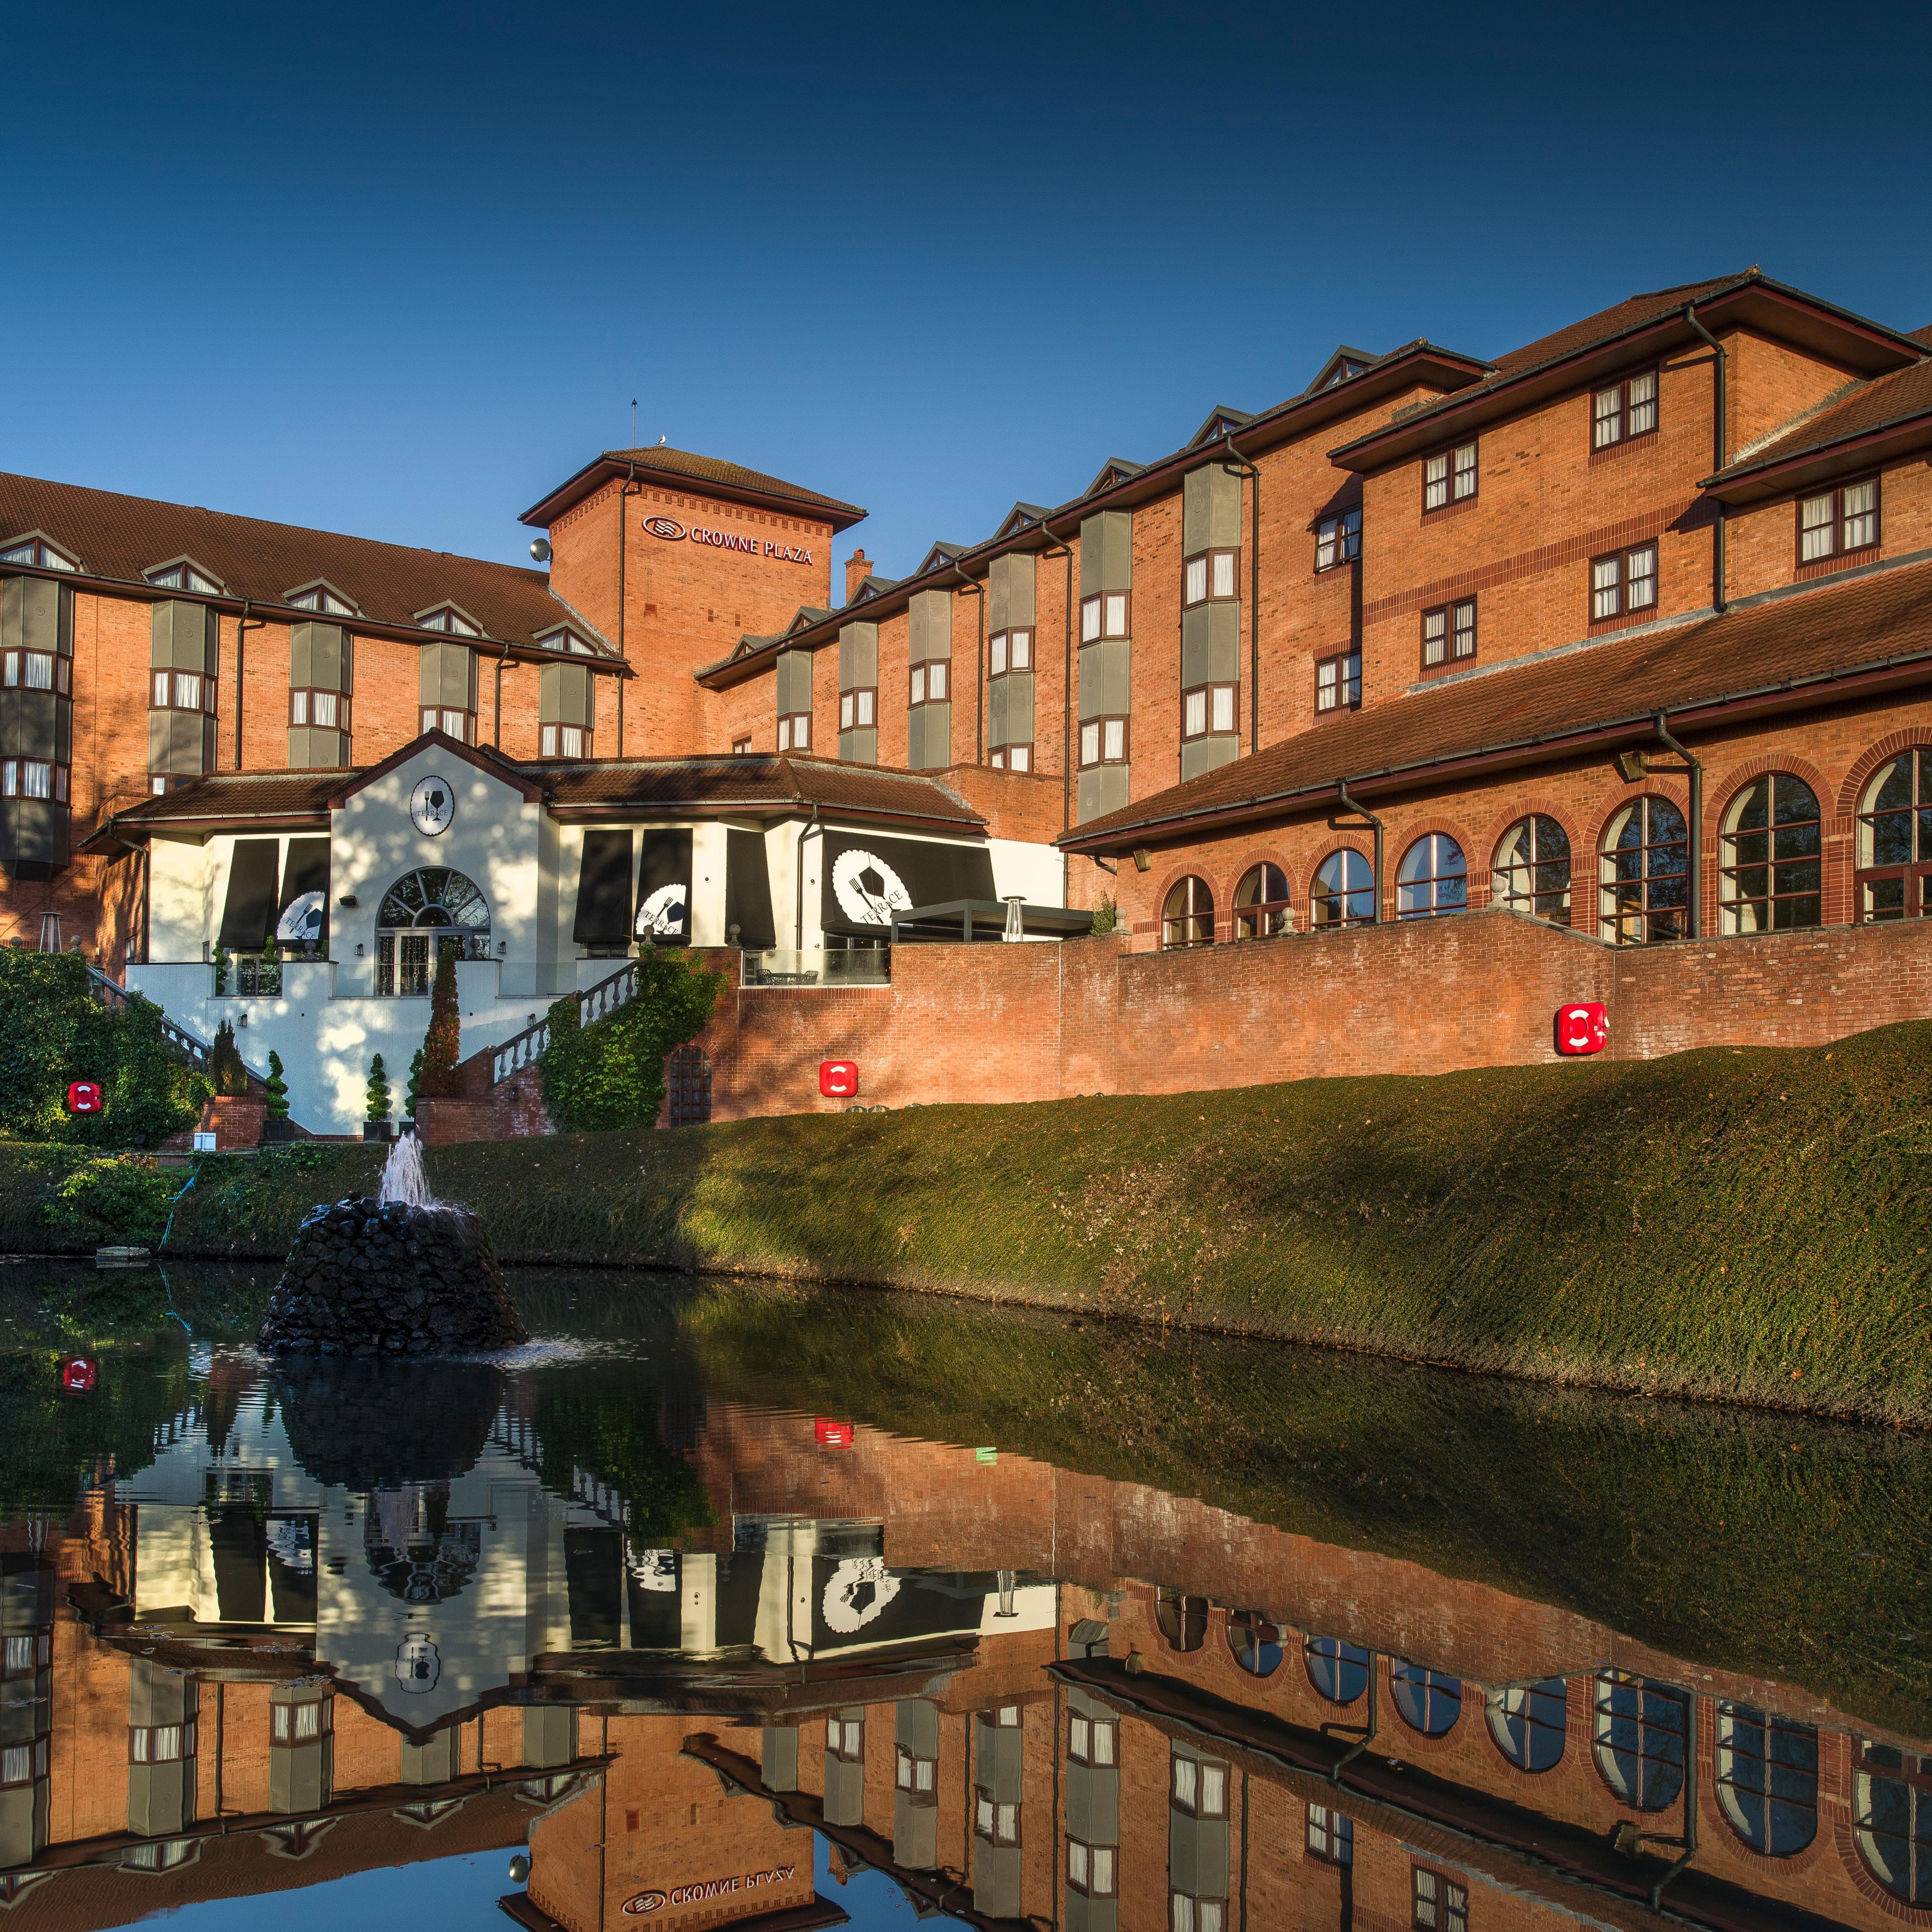 A luxurious lakeside hotel, Crowne Plaza Solihull.